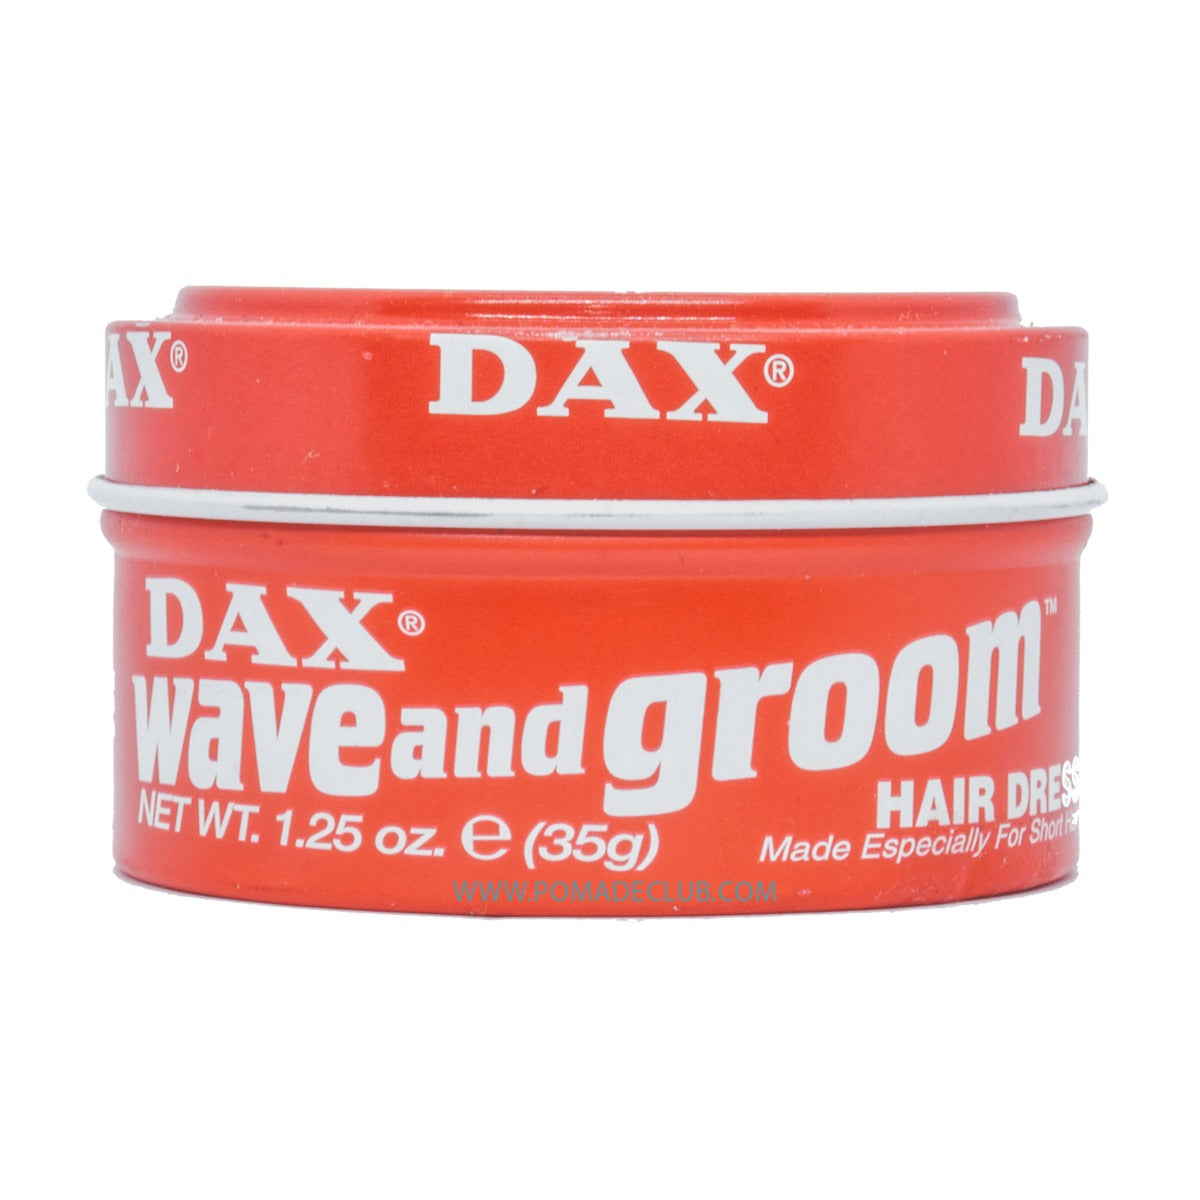 Dax Wave and Groom